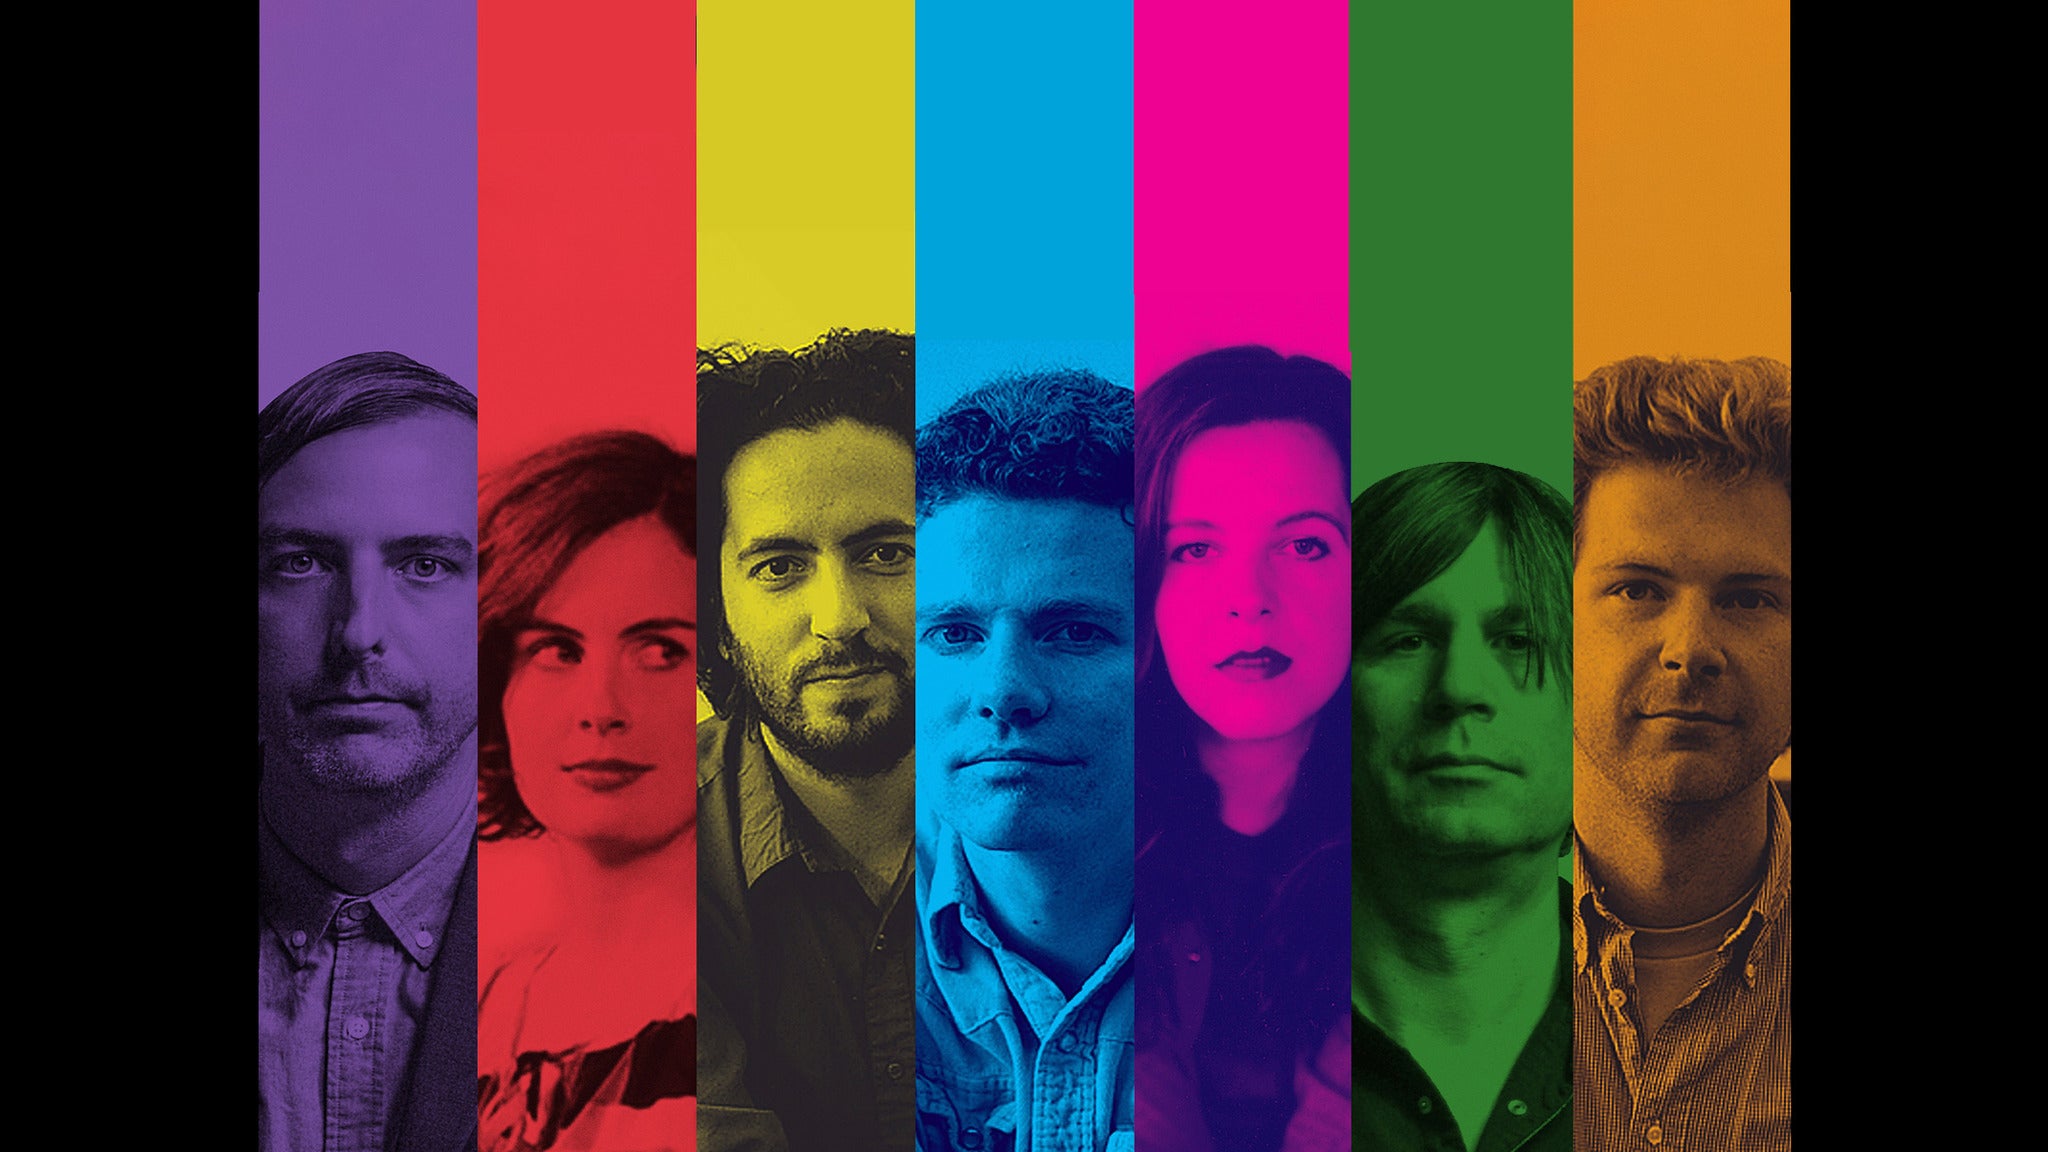 The New Pornographers - Performing the album 'Twin Cinema' in San Francisco promo photo for Seated Artist presale offer code